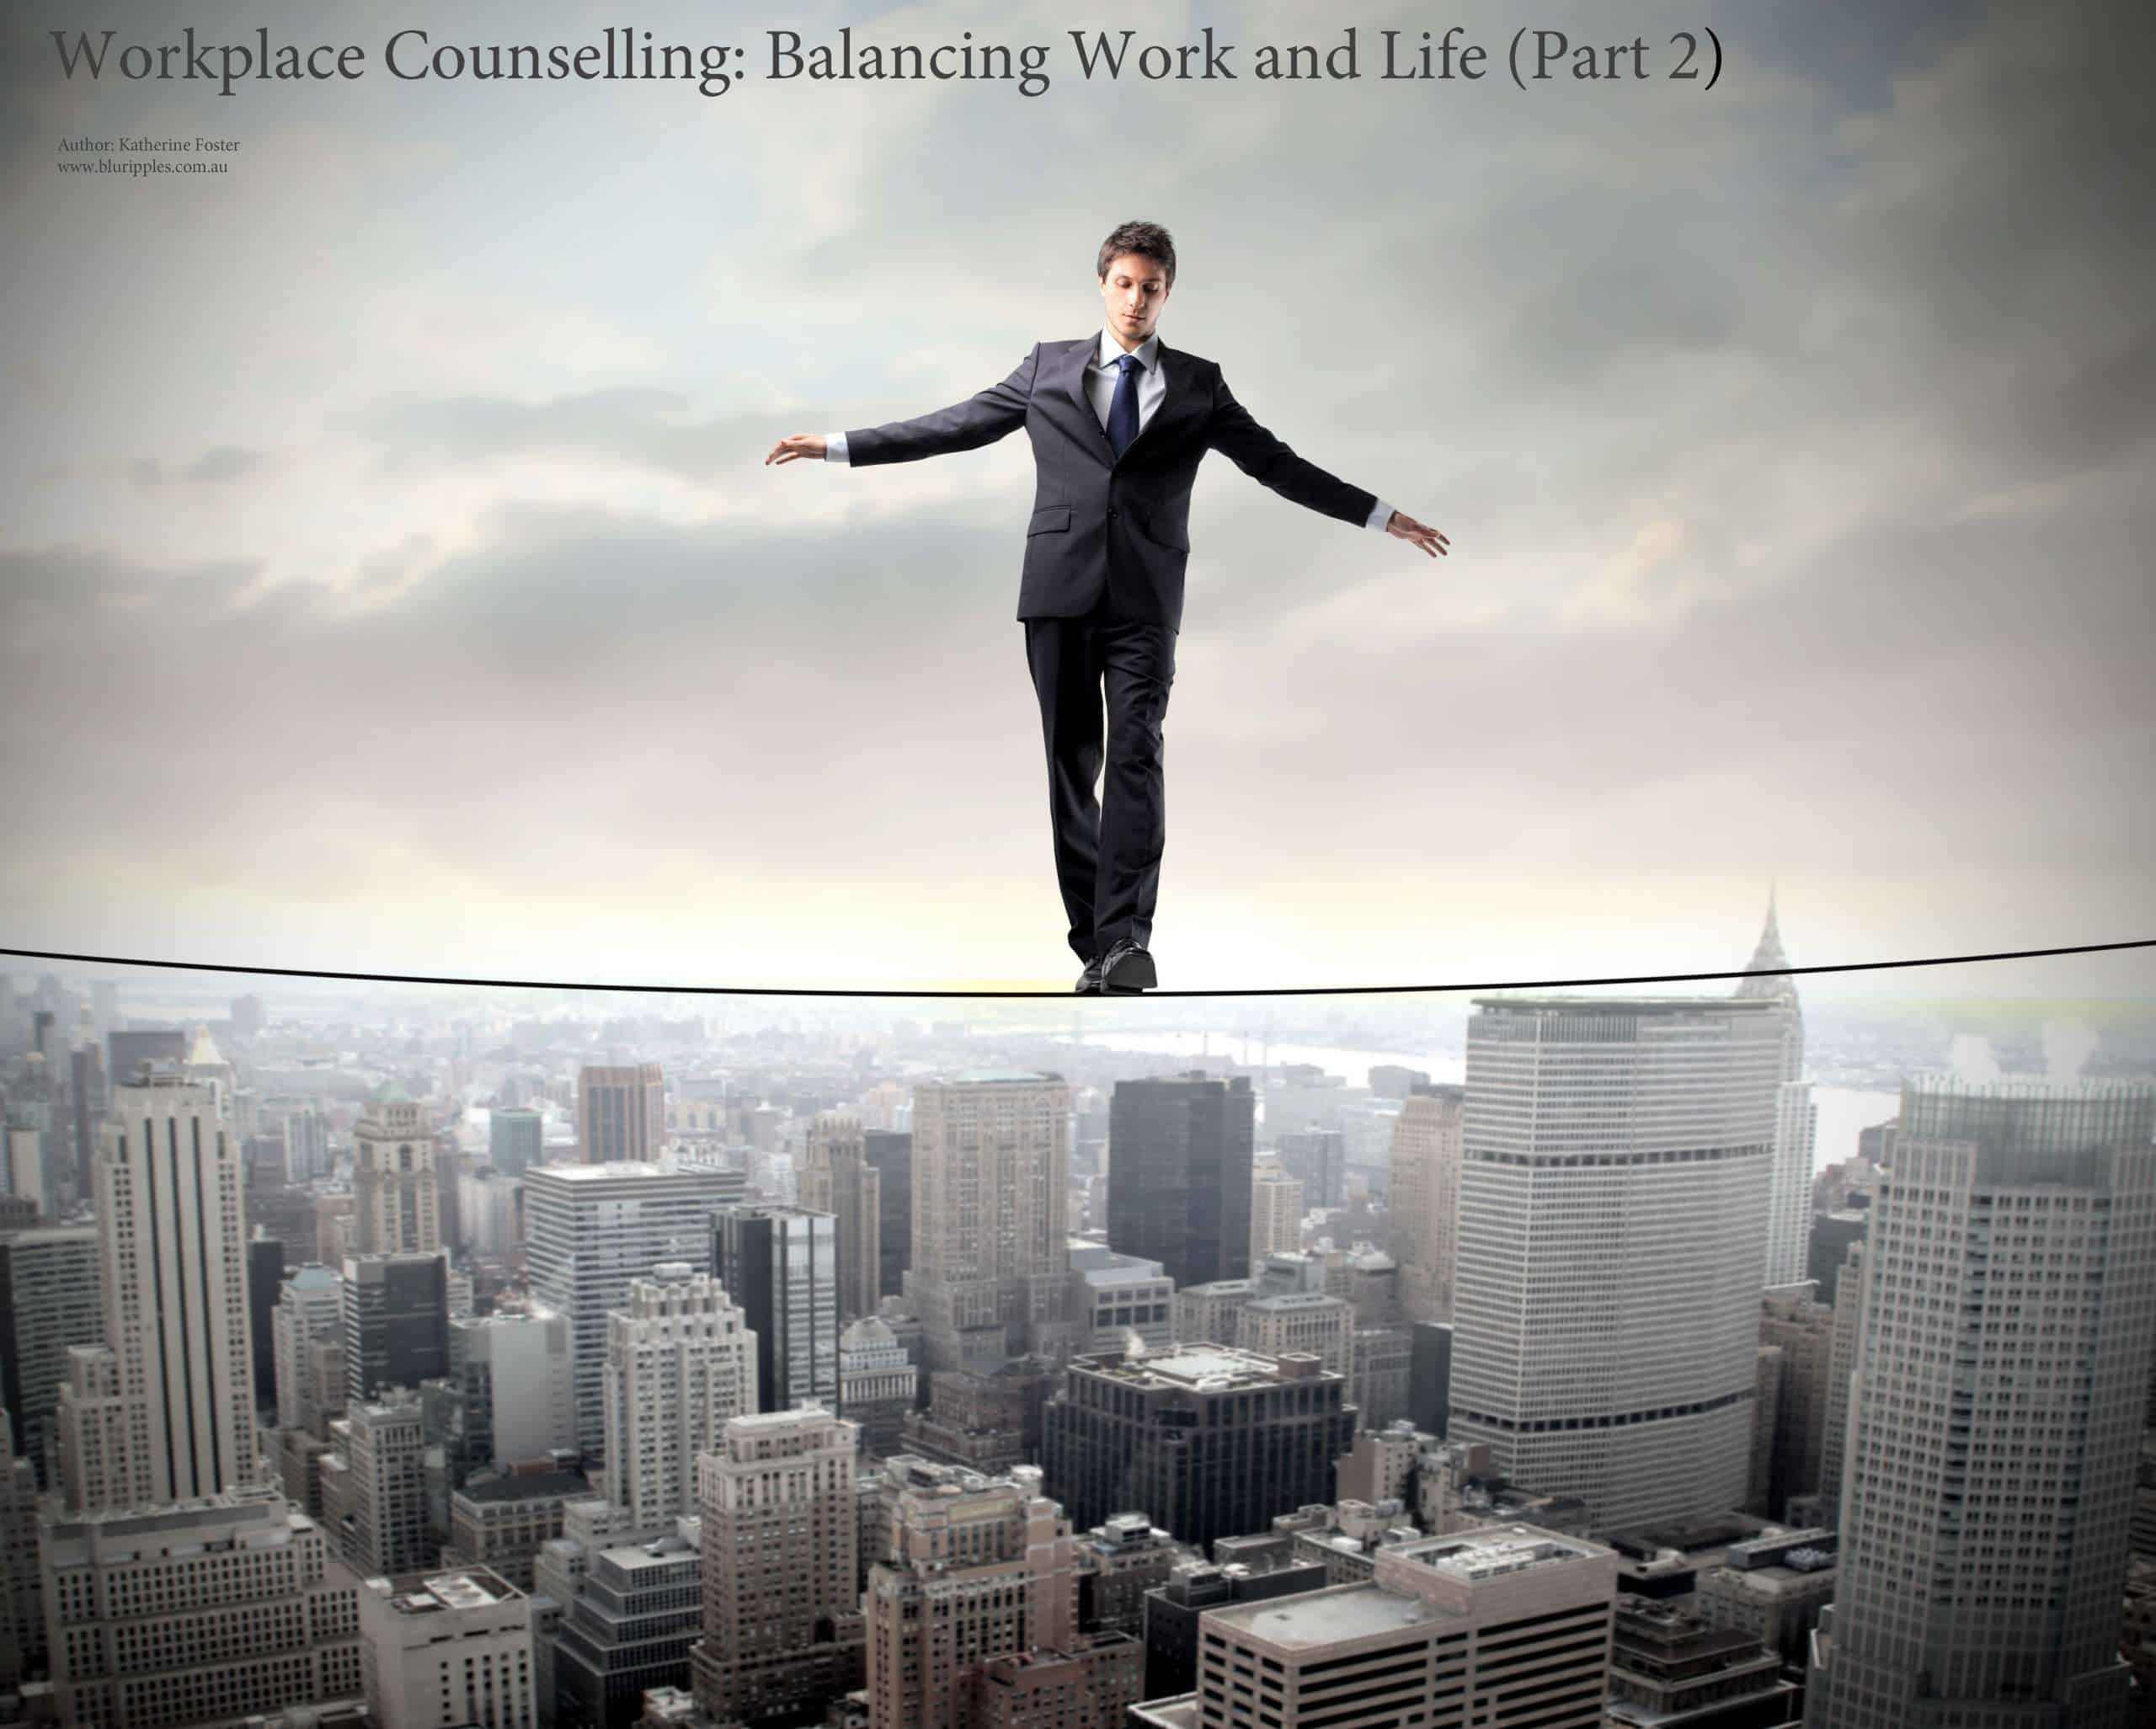 Workplace Counselling - Balancing Work and Life (Part 2) by Katherine Foster